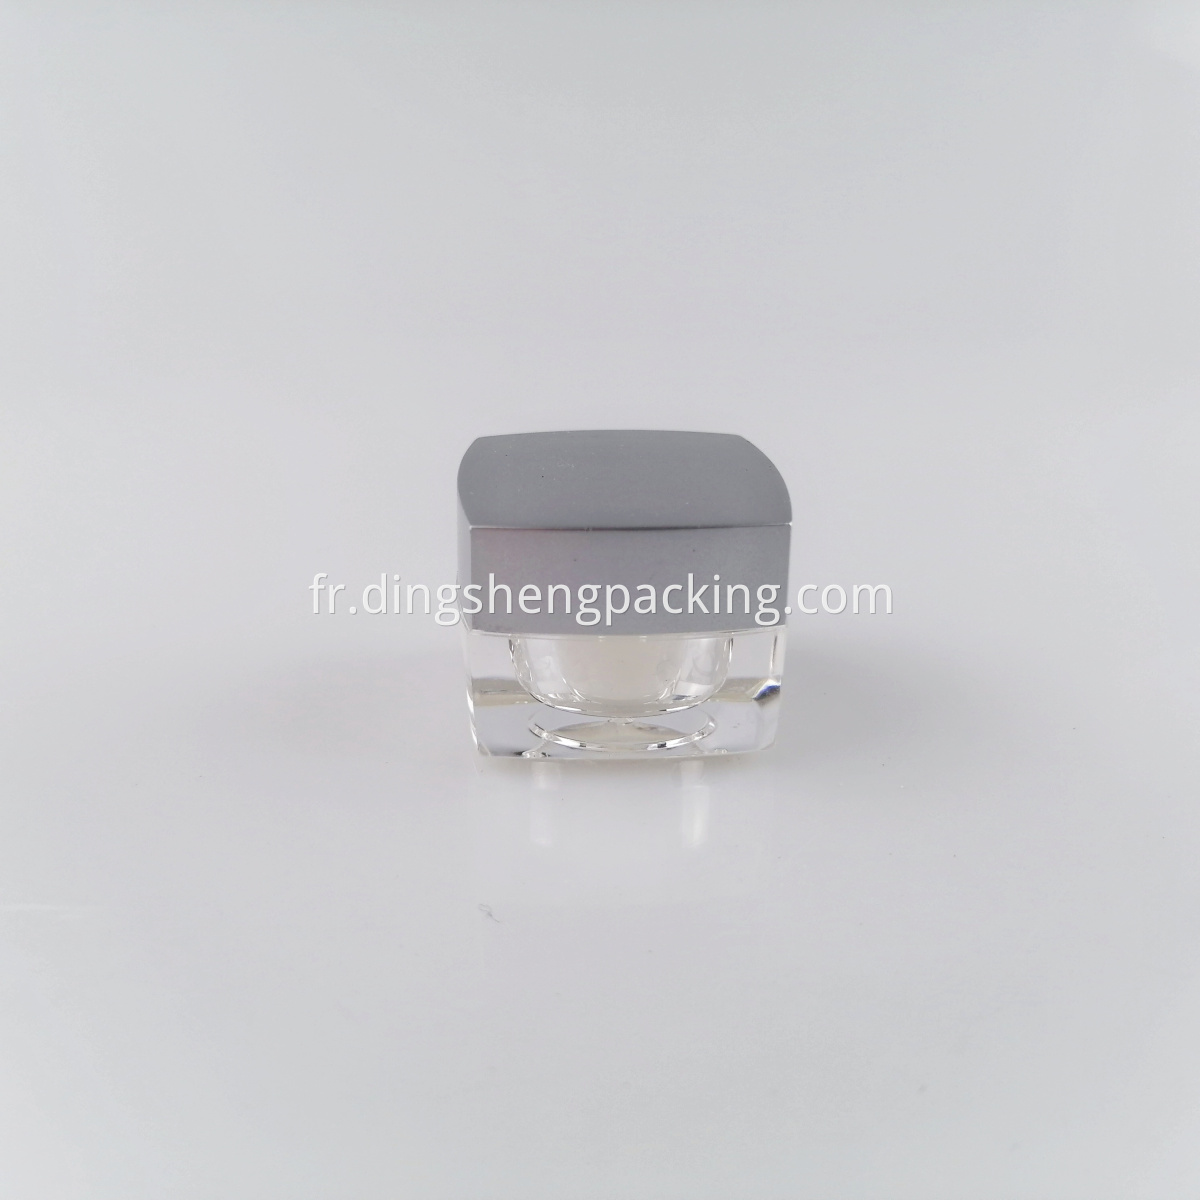 Luxury Clear Silver Square Shape Acrylic Cosmetic Packaging